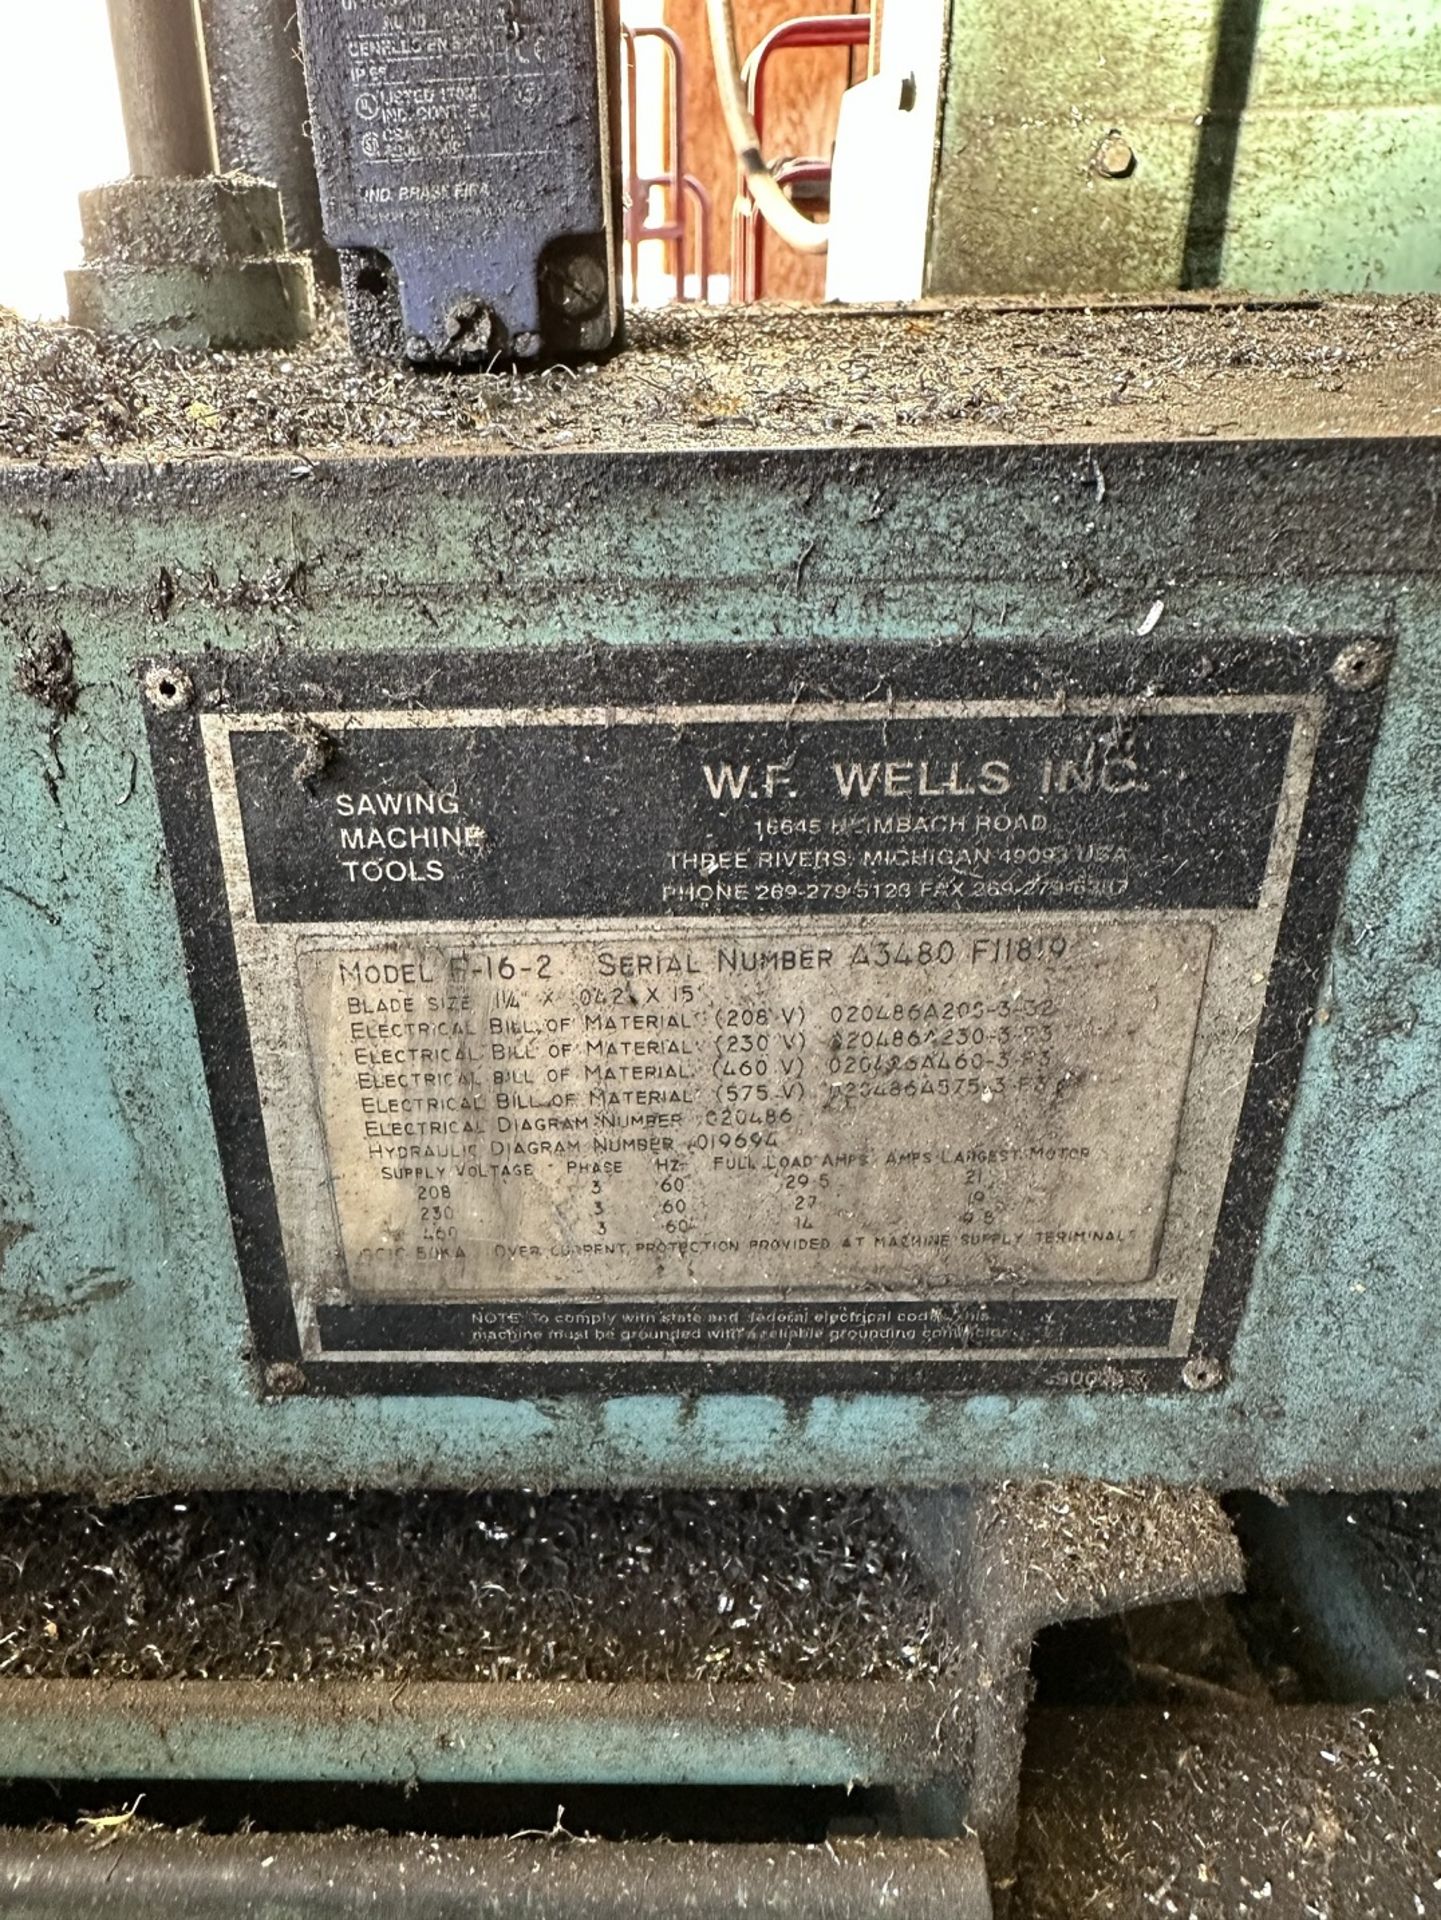 W.F. WELLS HORIZONTAL BAND SAW, MODEL F-16-2, S/N A3480-F11819, W/ 10' OF 14" ROLLER CONVEYOR - Image 6 of 7